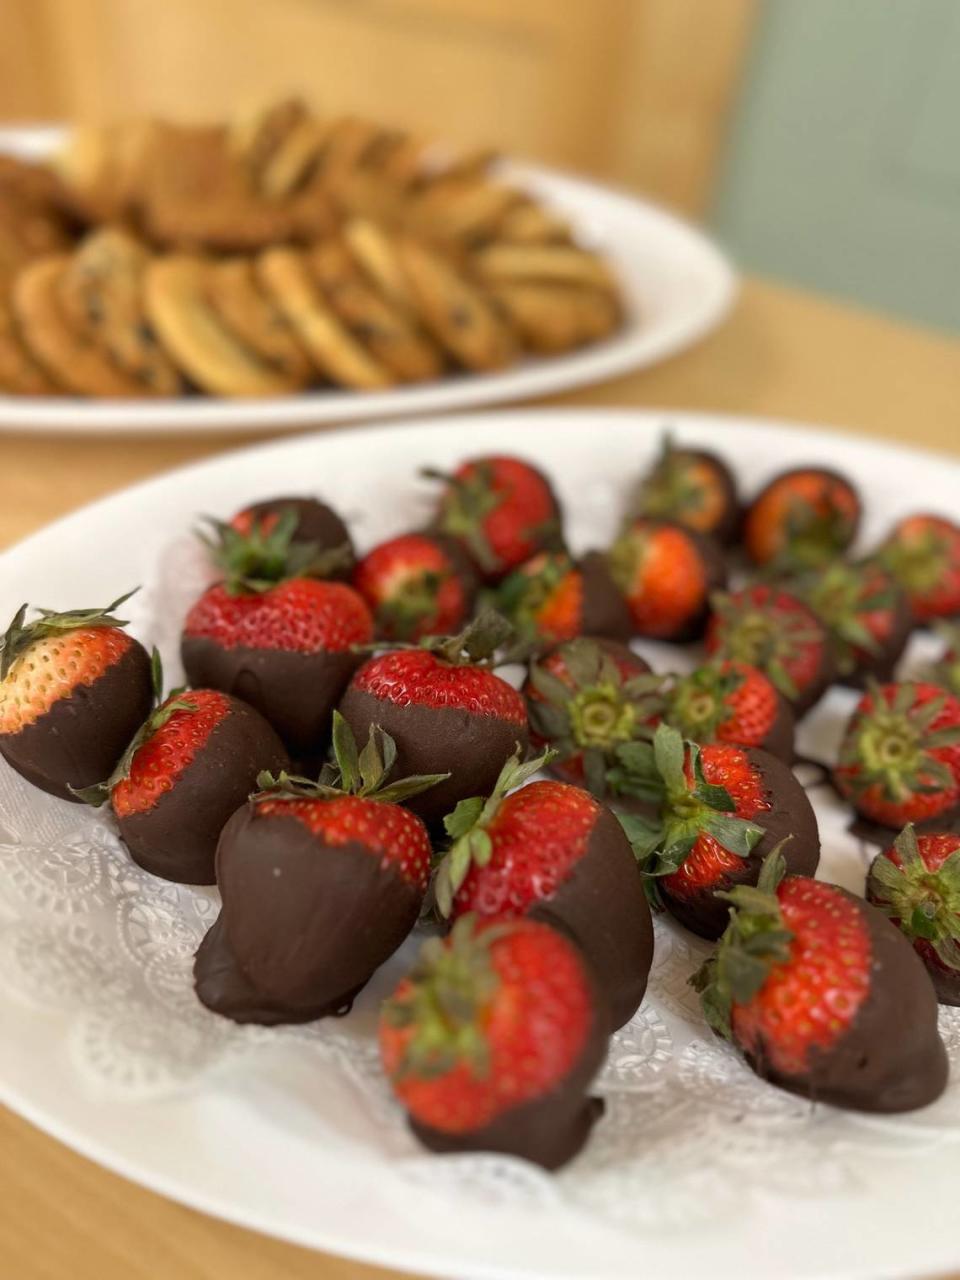 Chocolate dipped strawberries are a go-to Valentine’s Day treat that can be made at home. Harrison Schailey/Photo provided